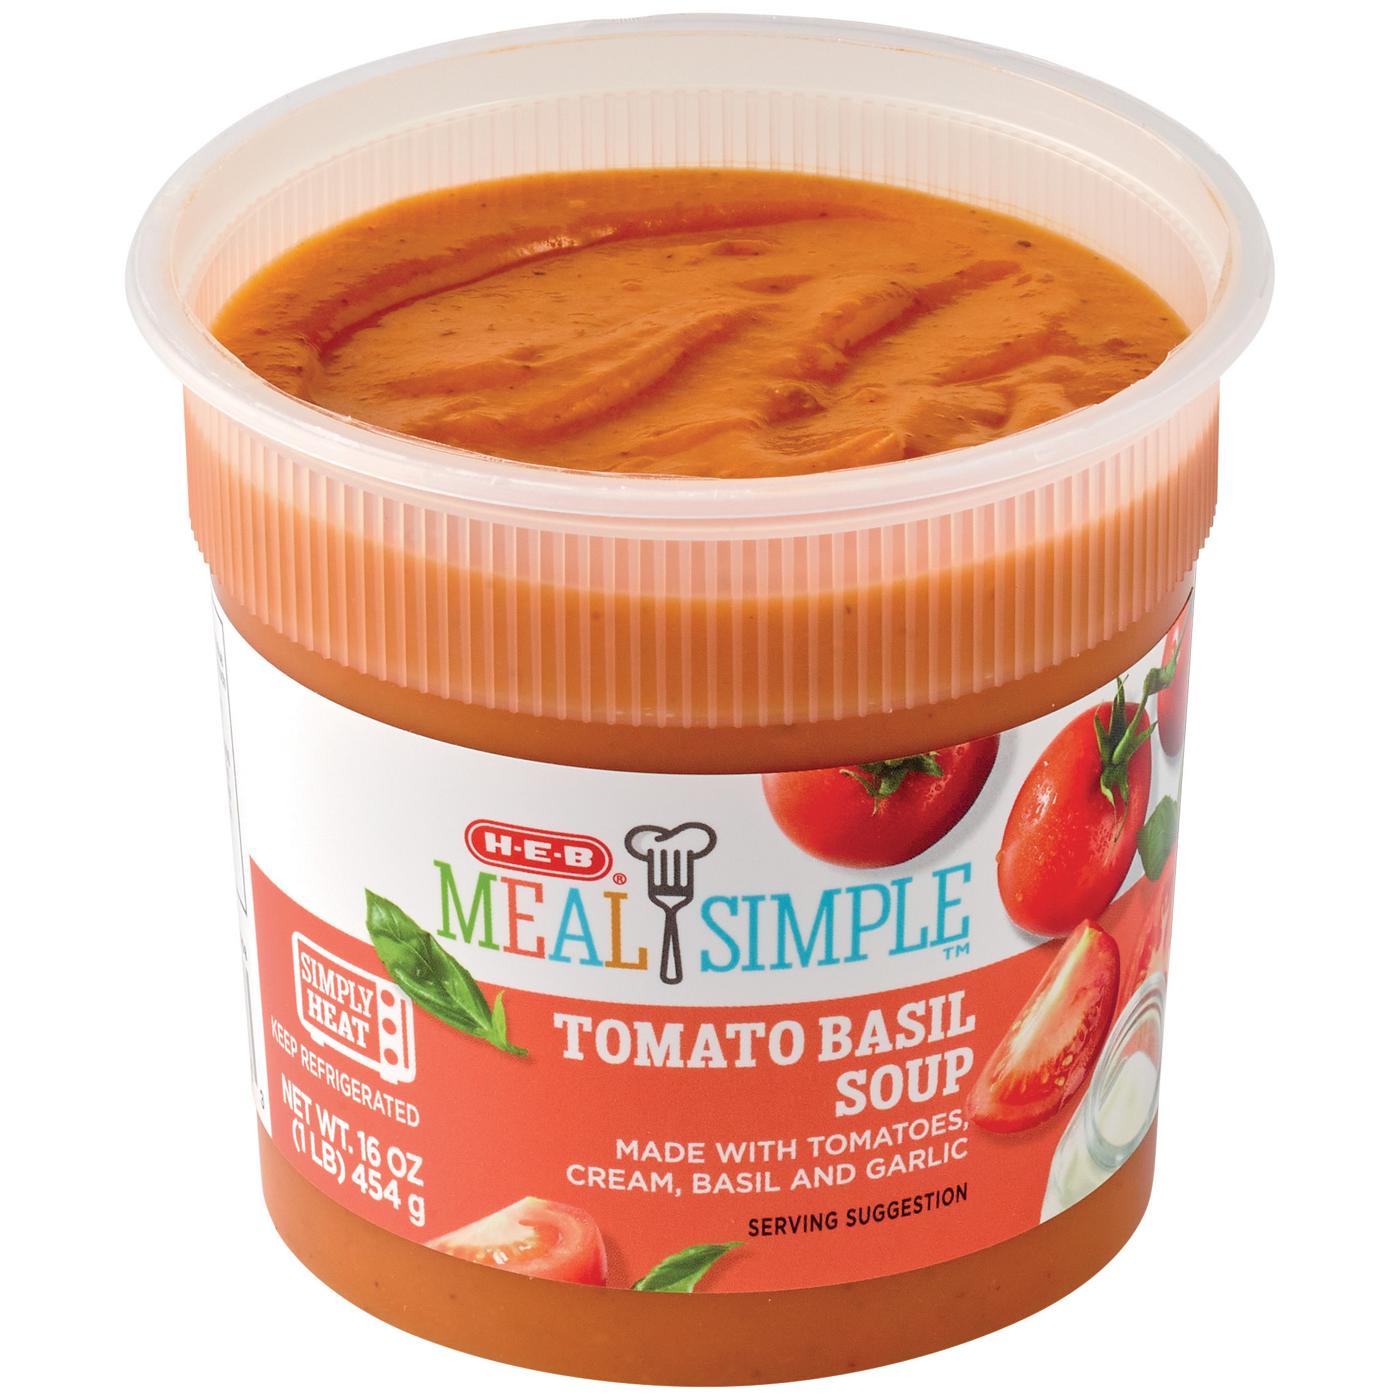 Meal Simple by H-E-B Tomato Basil Soup; image 1 of 2